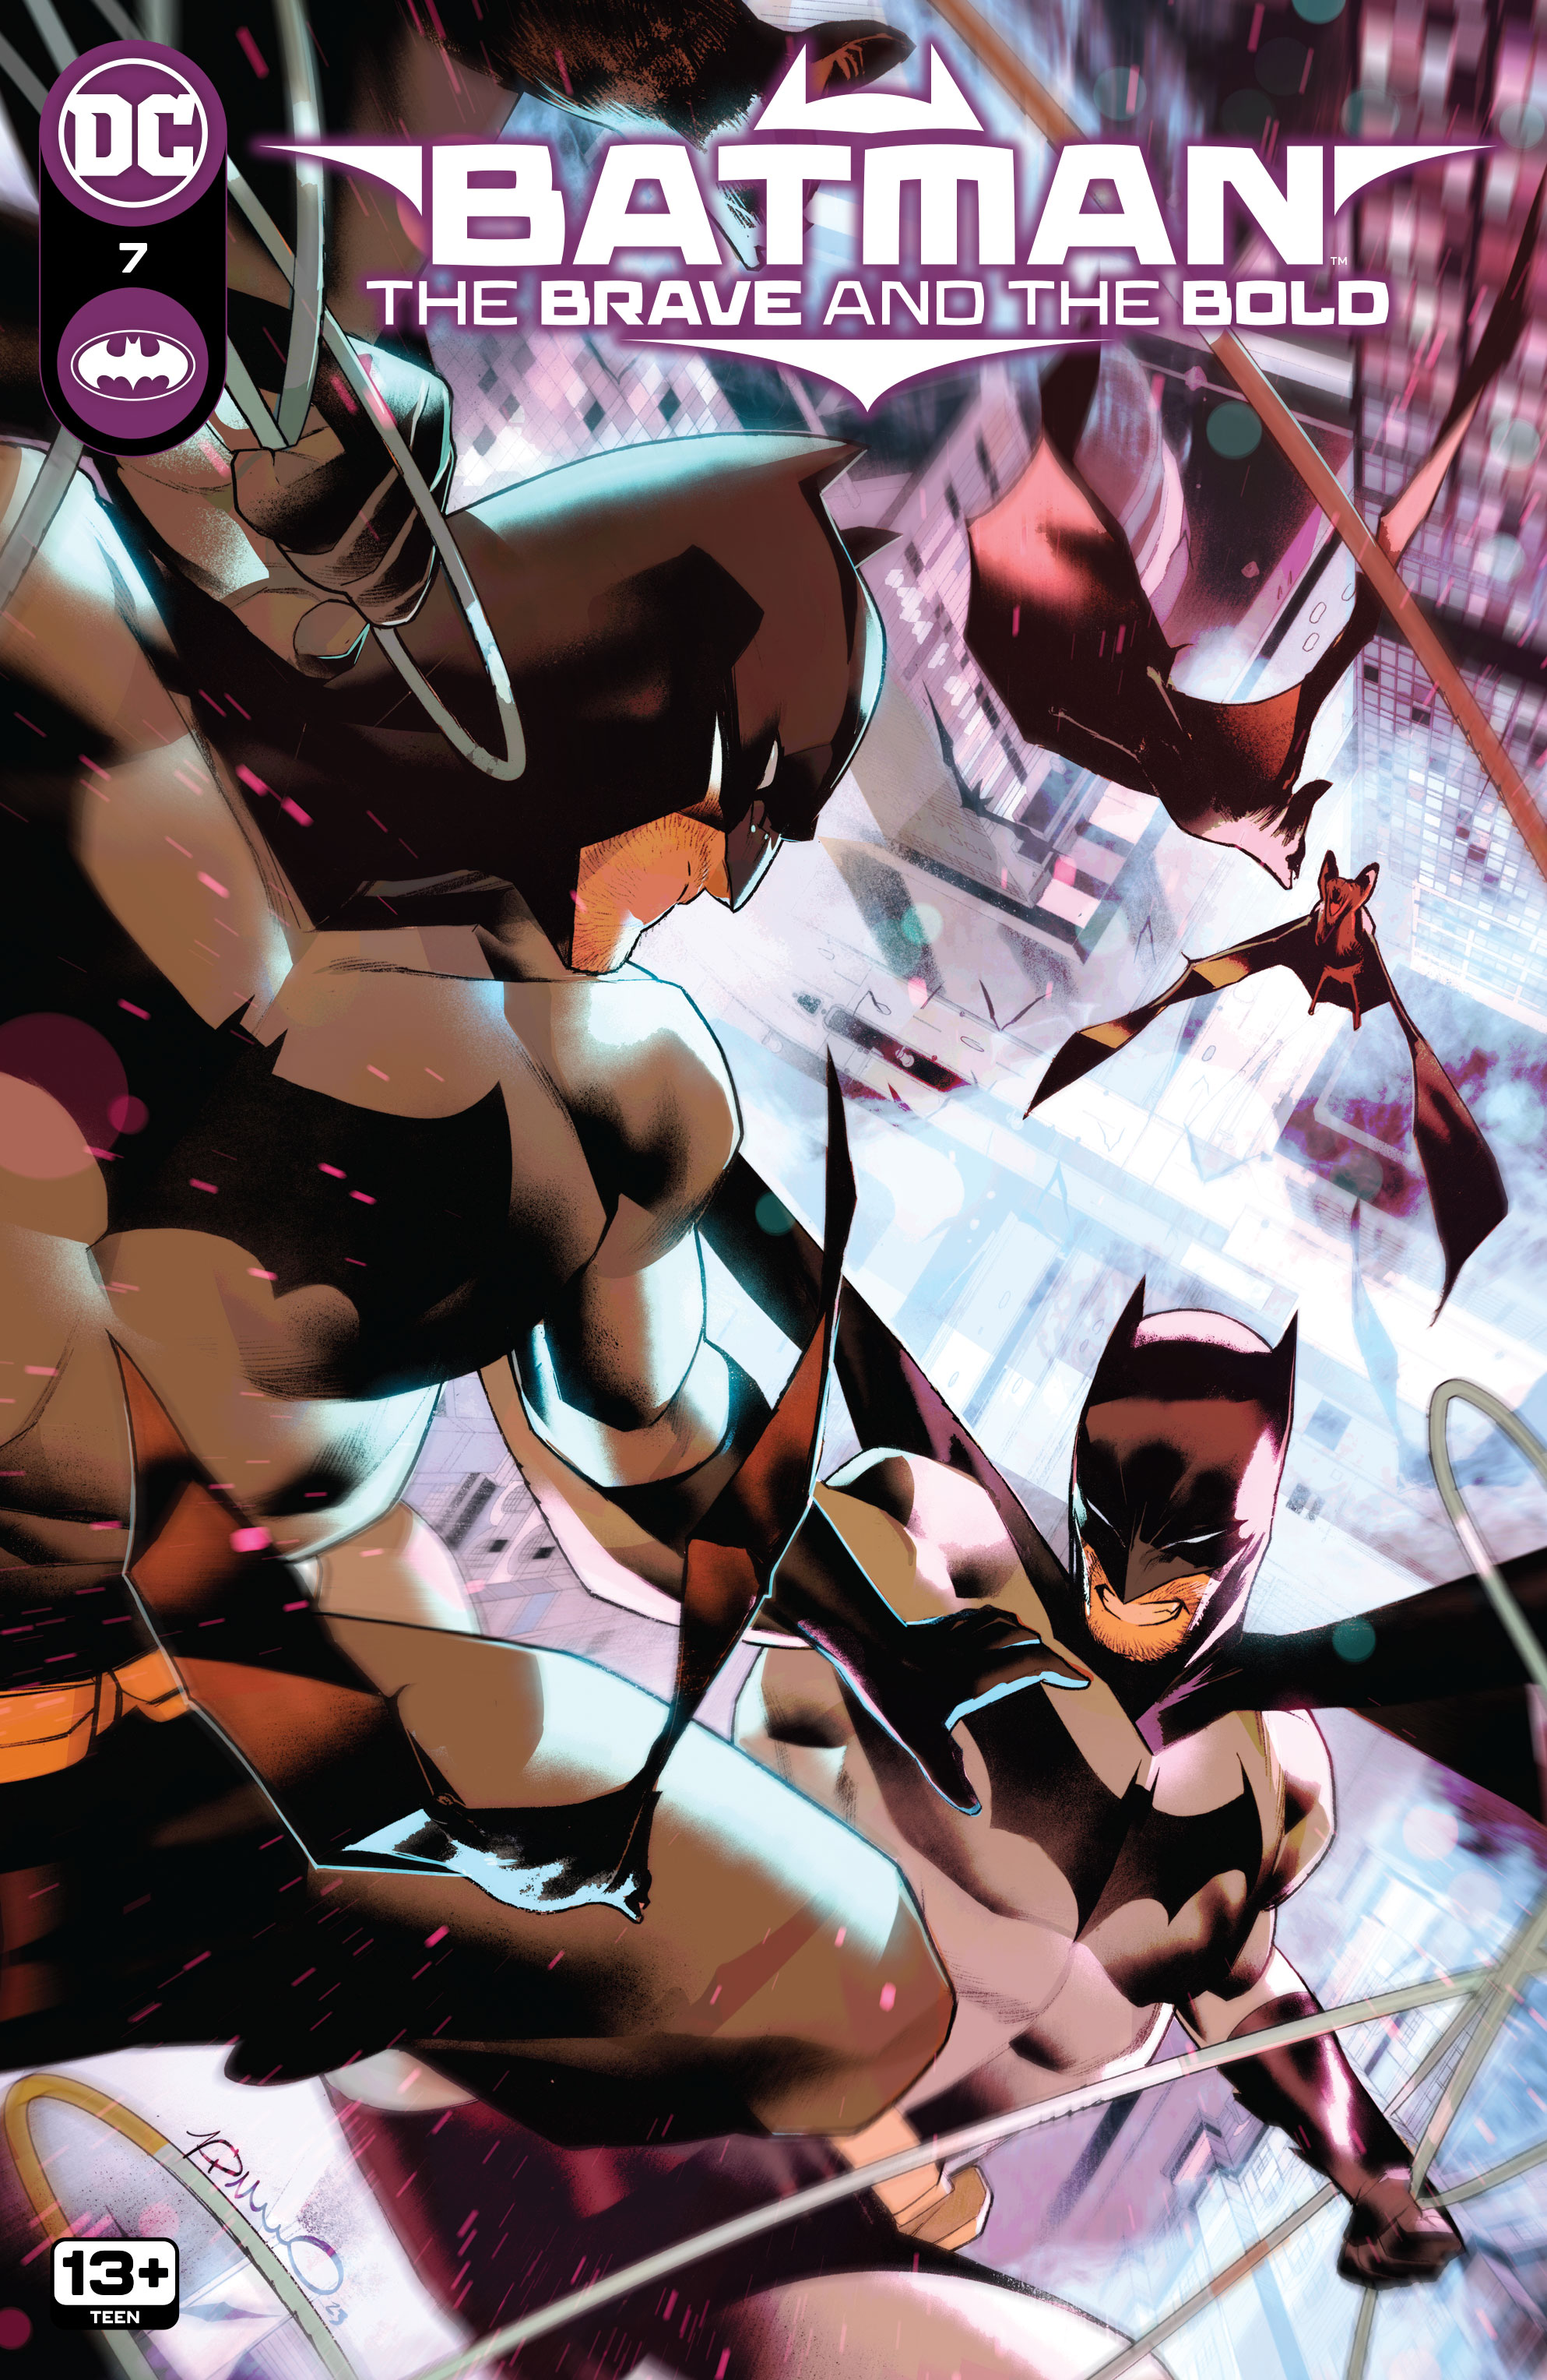 DC brings back Batman: The Brave and the Bold in comics ahead of